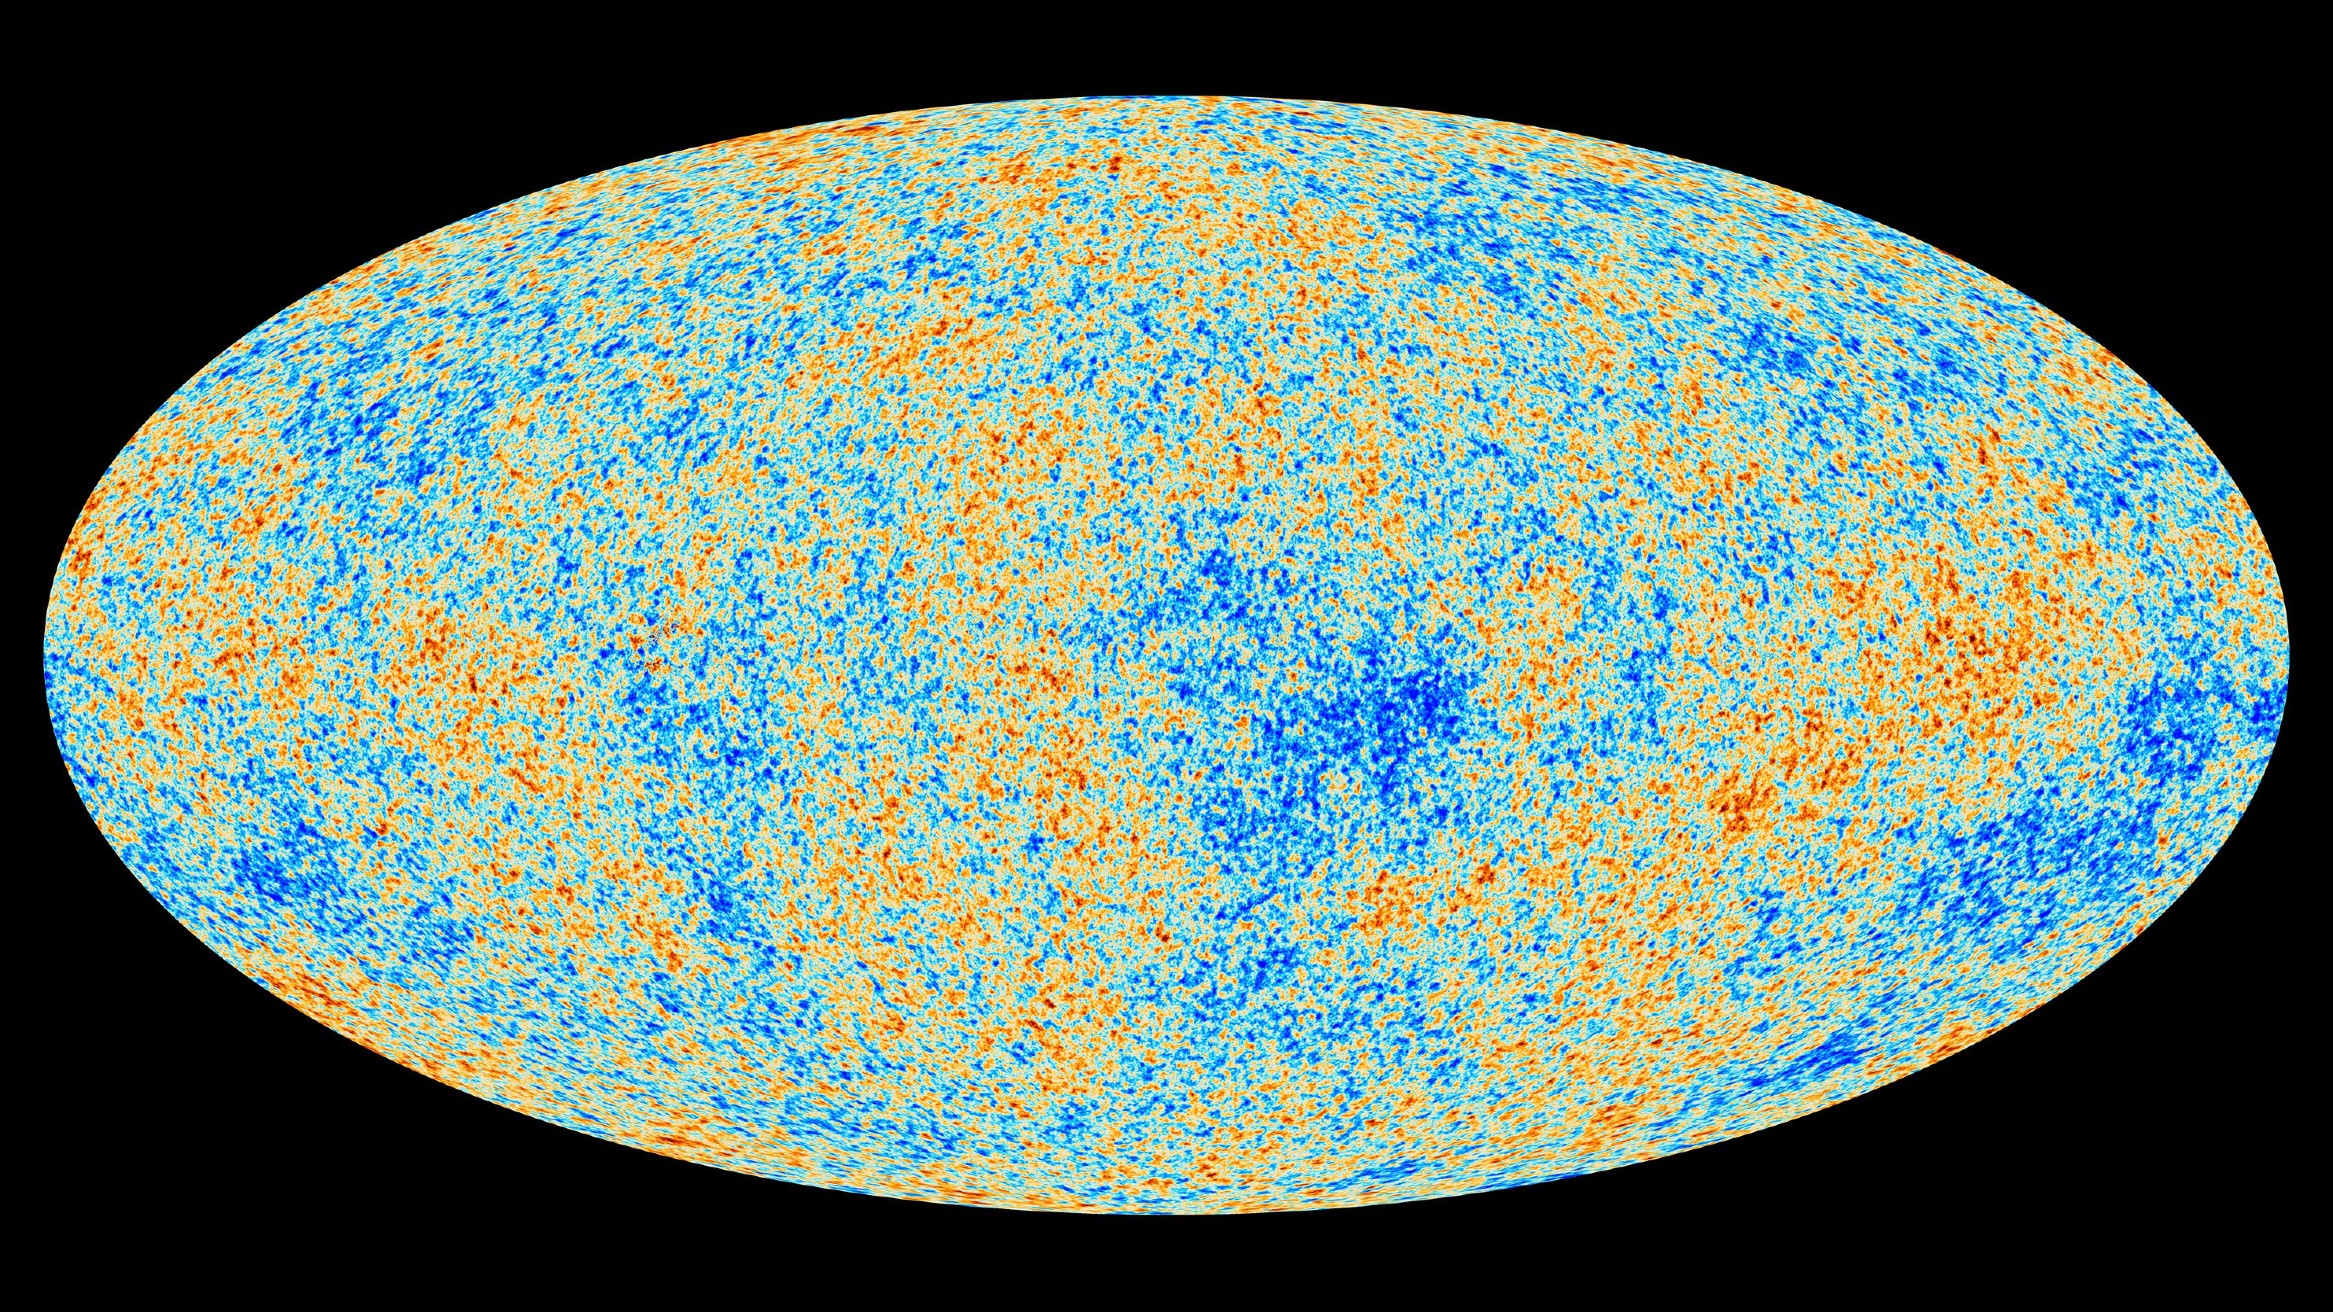 The cosmic microwave background seen from the Planck satellite